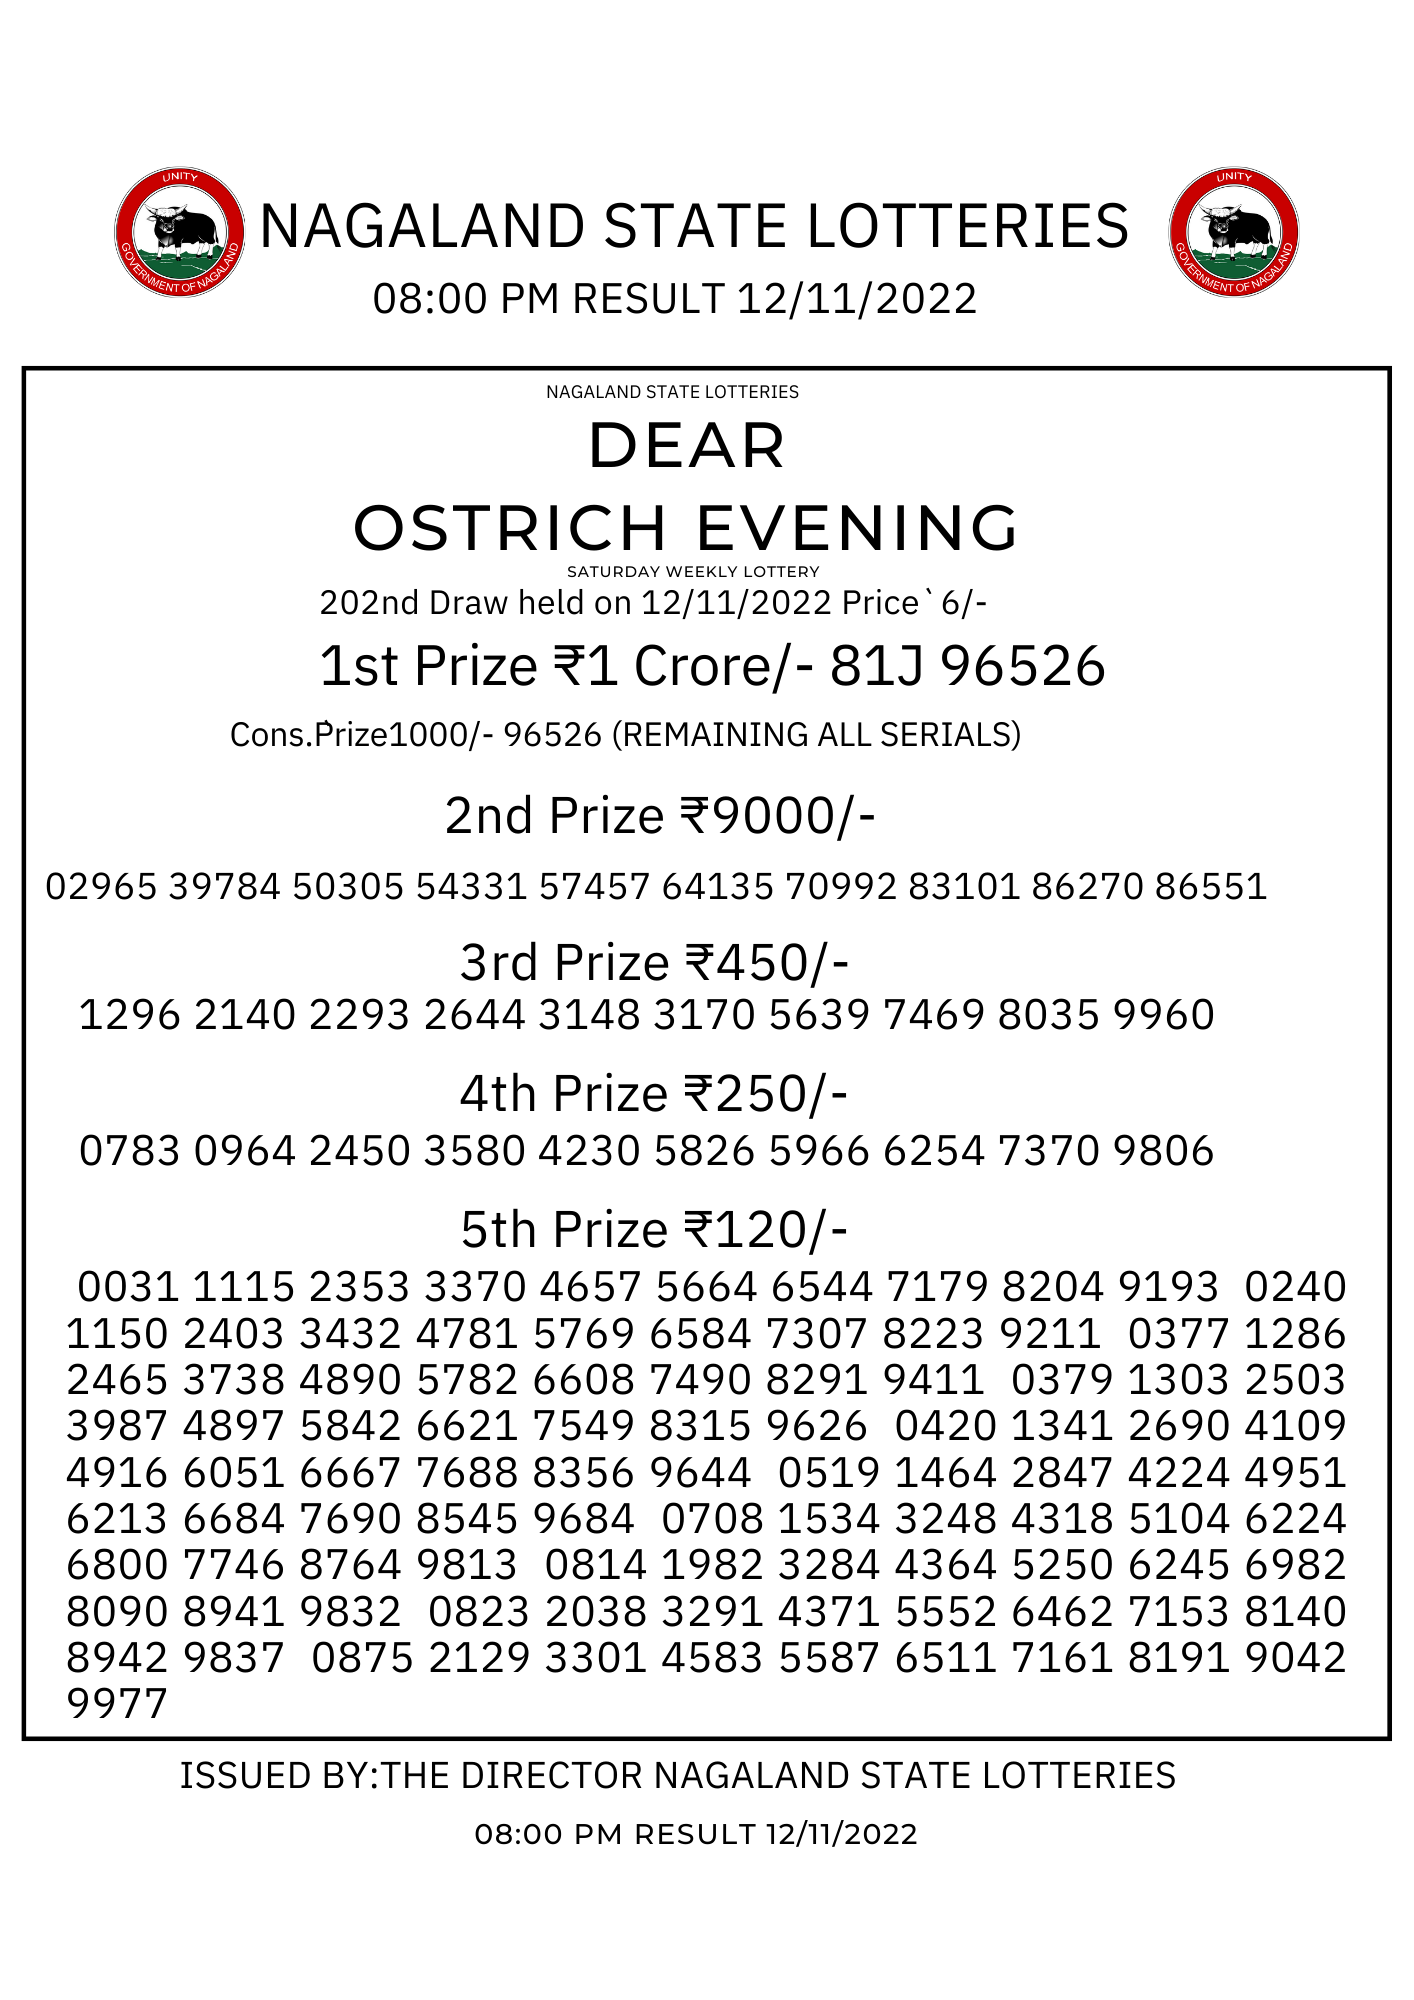 Nagaland Lottery results: Winning numbers of Dear Ostrich Evening results